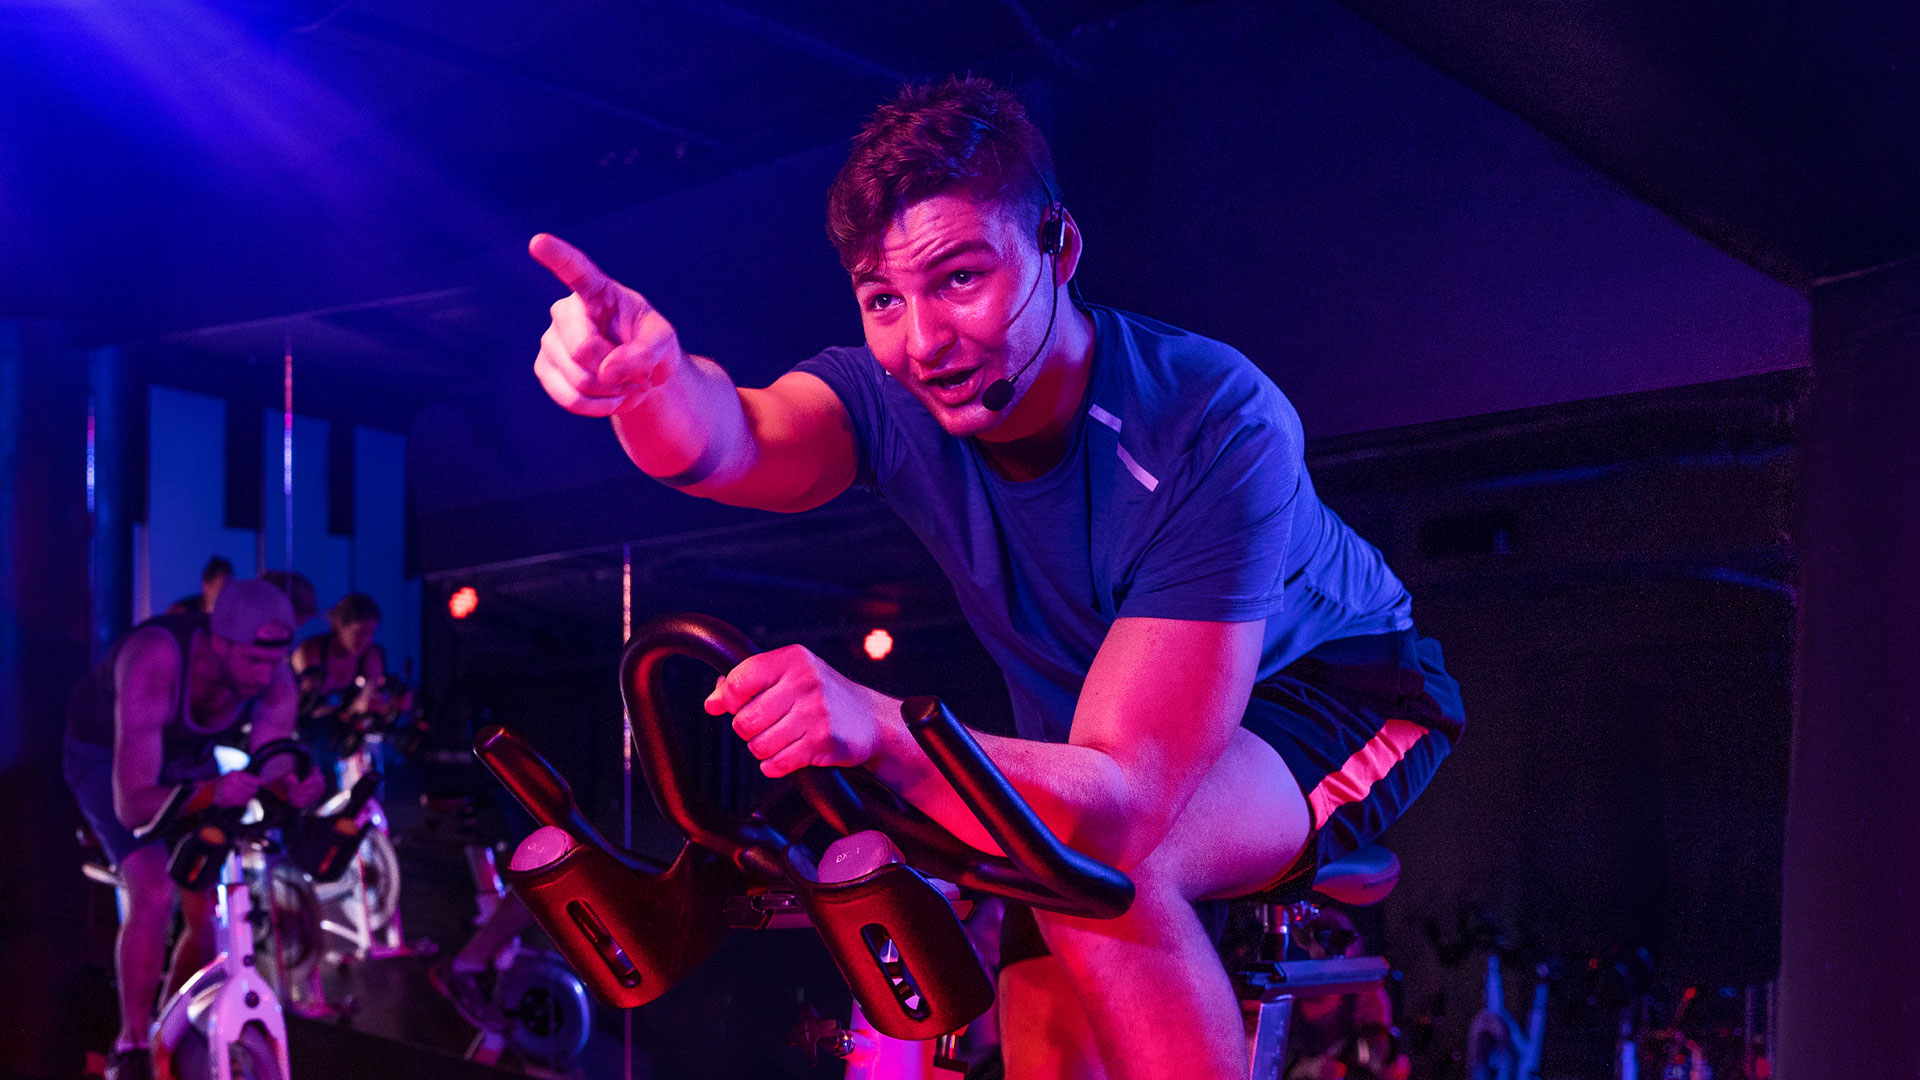 Photograph of person on an exercise bike